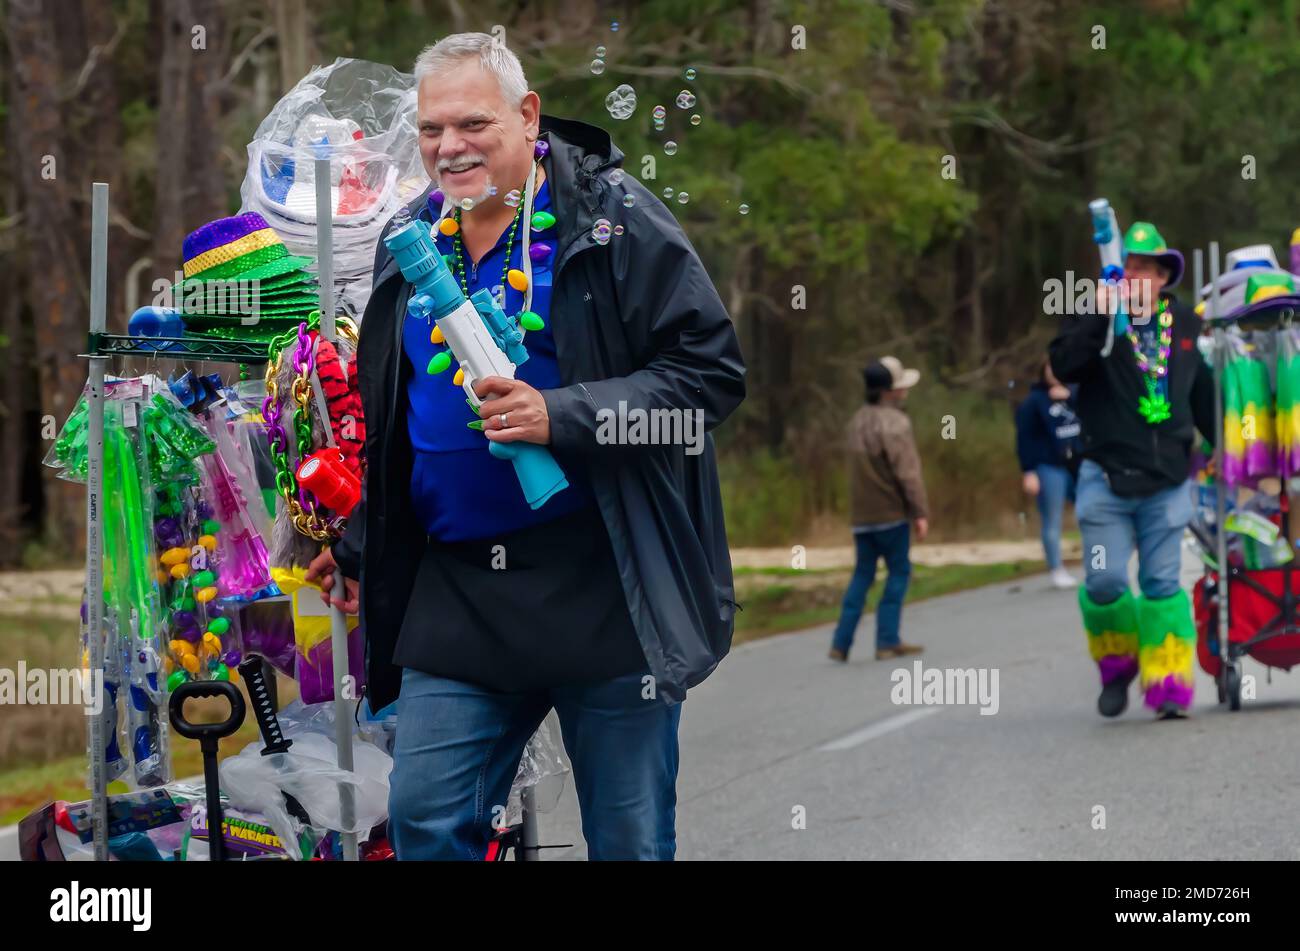 Mardi Gras street vendors sell bubble guns and other trinkets during the Krewe de la Dauphine Mardi Gras parade in Dauphin Island, Alabama. Stock Photo